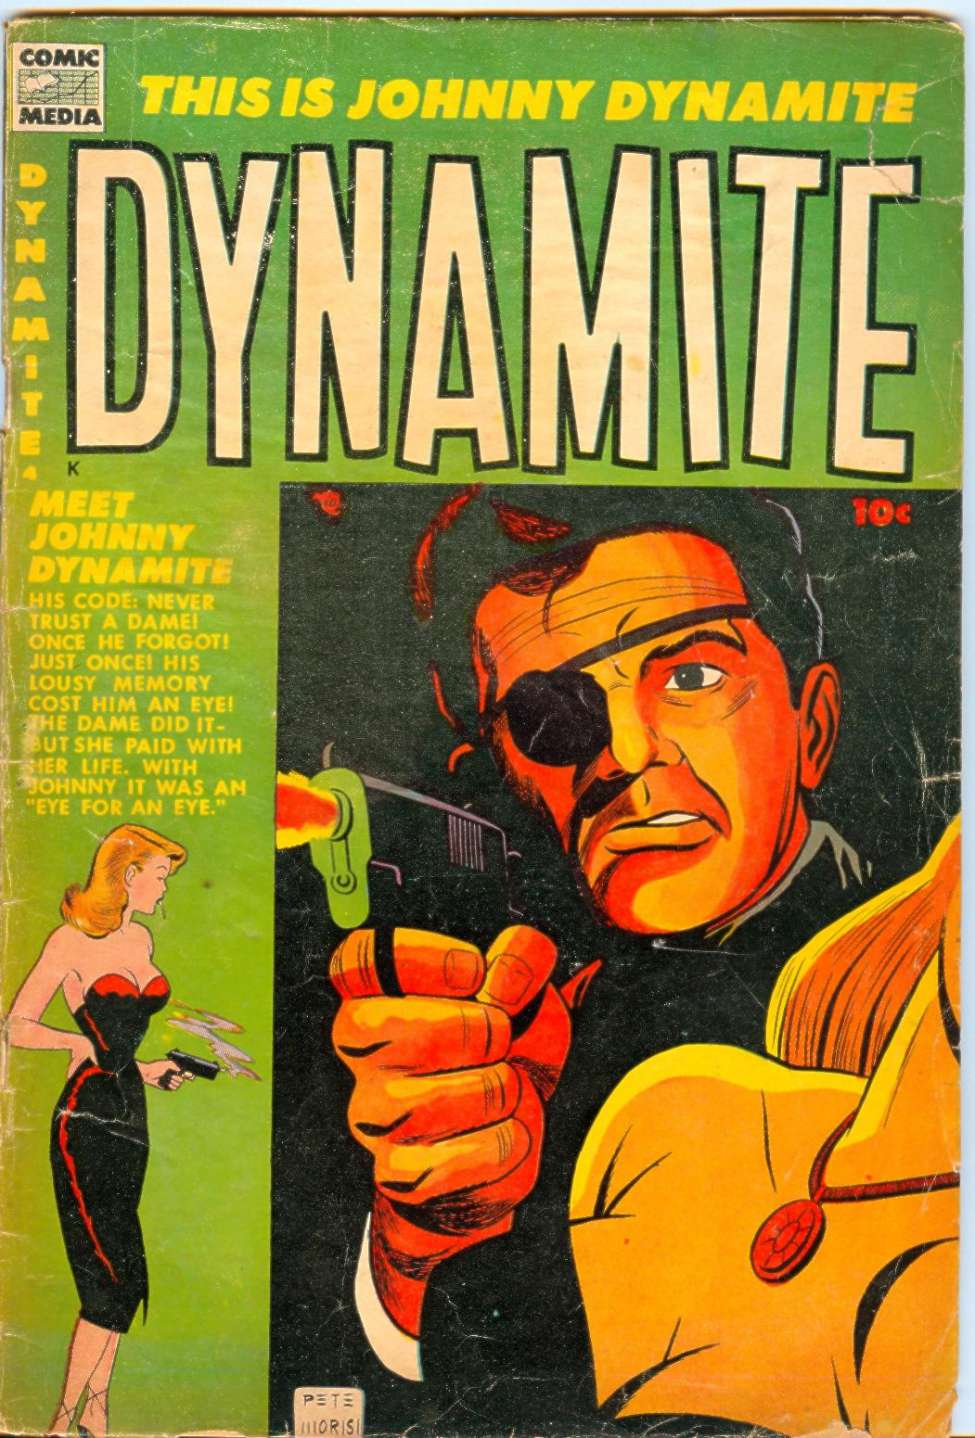 Book Cover For Dynamite 4